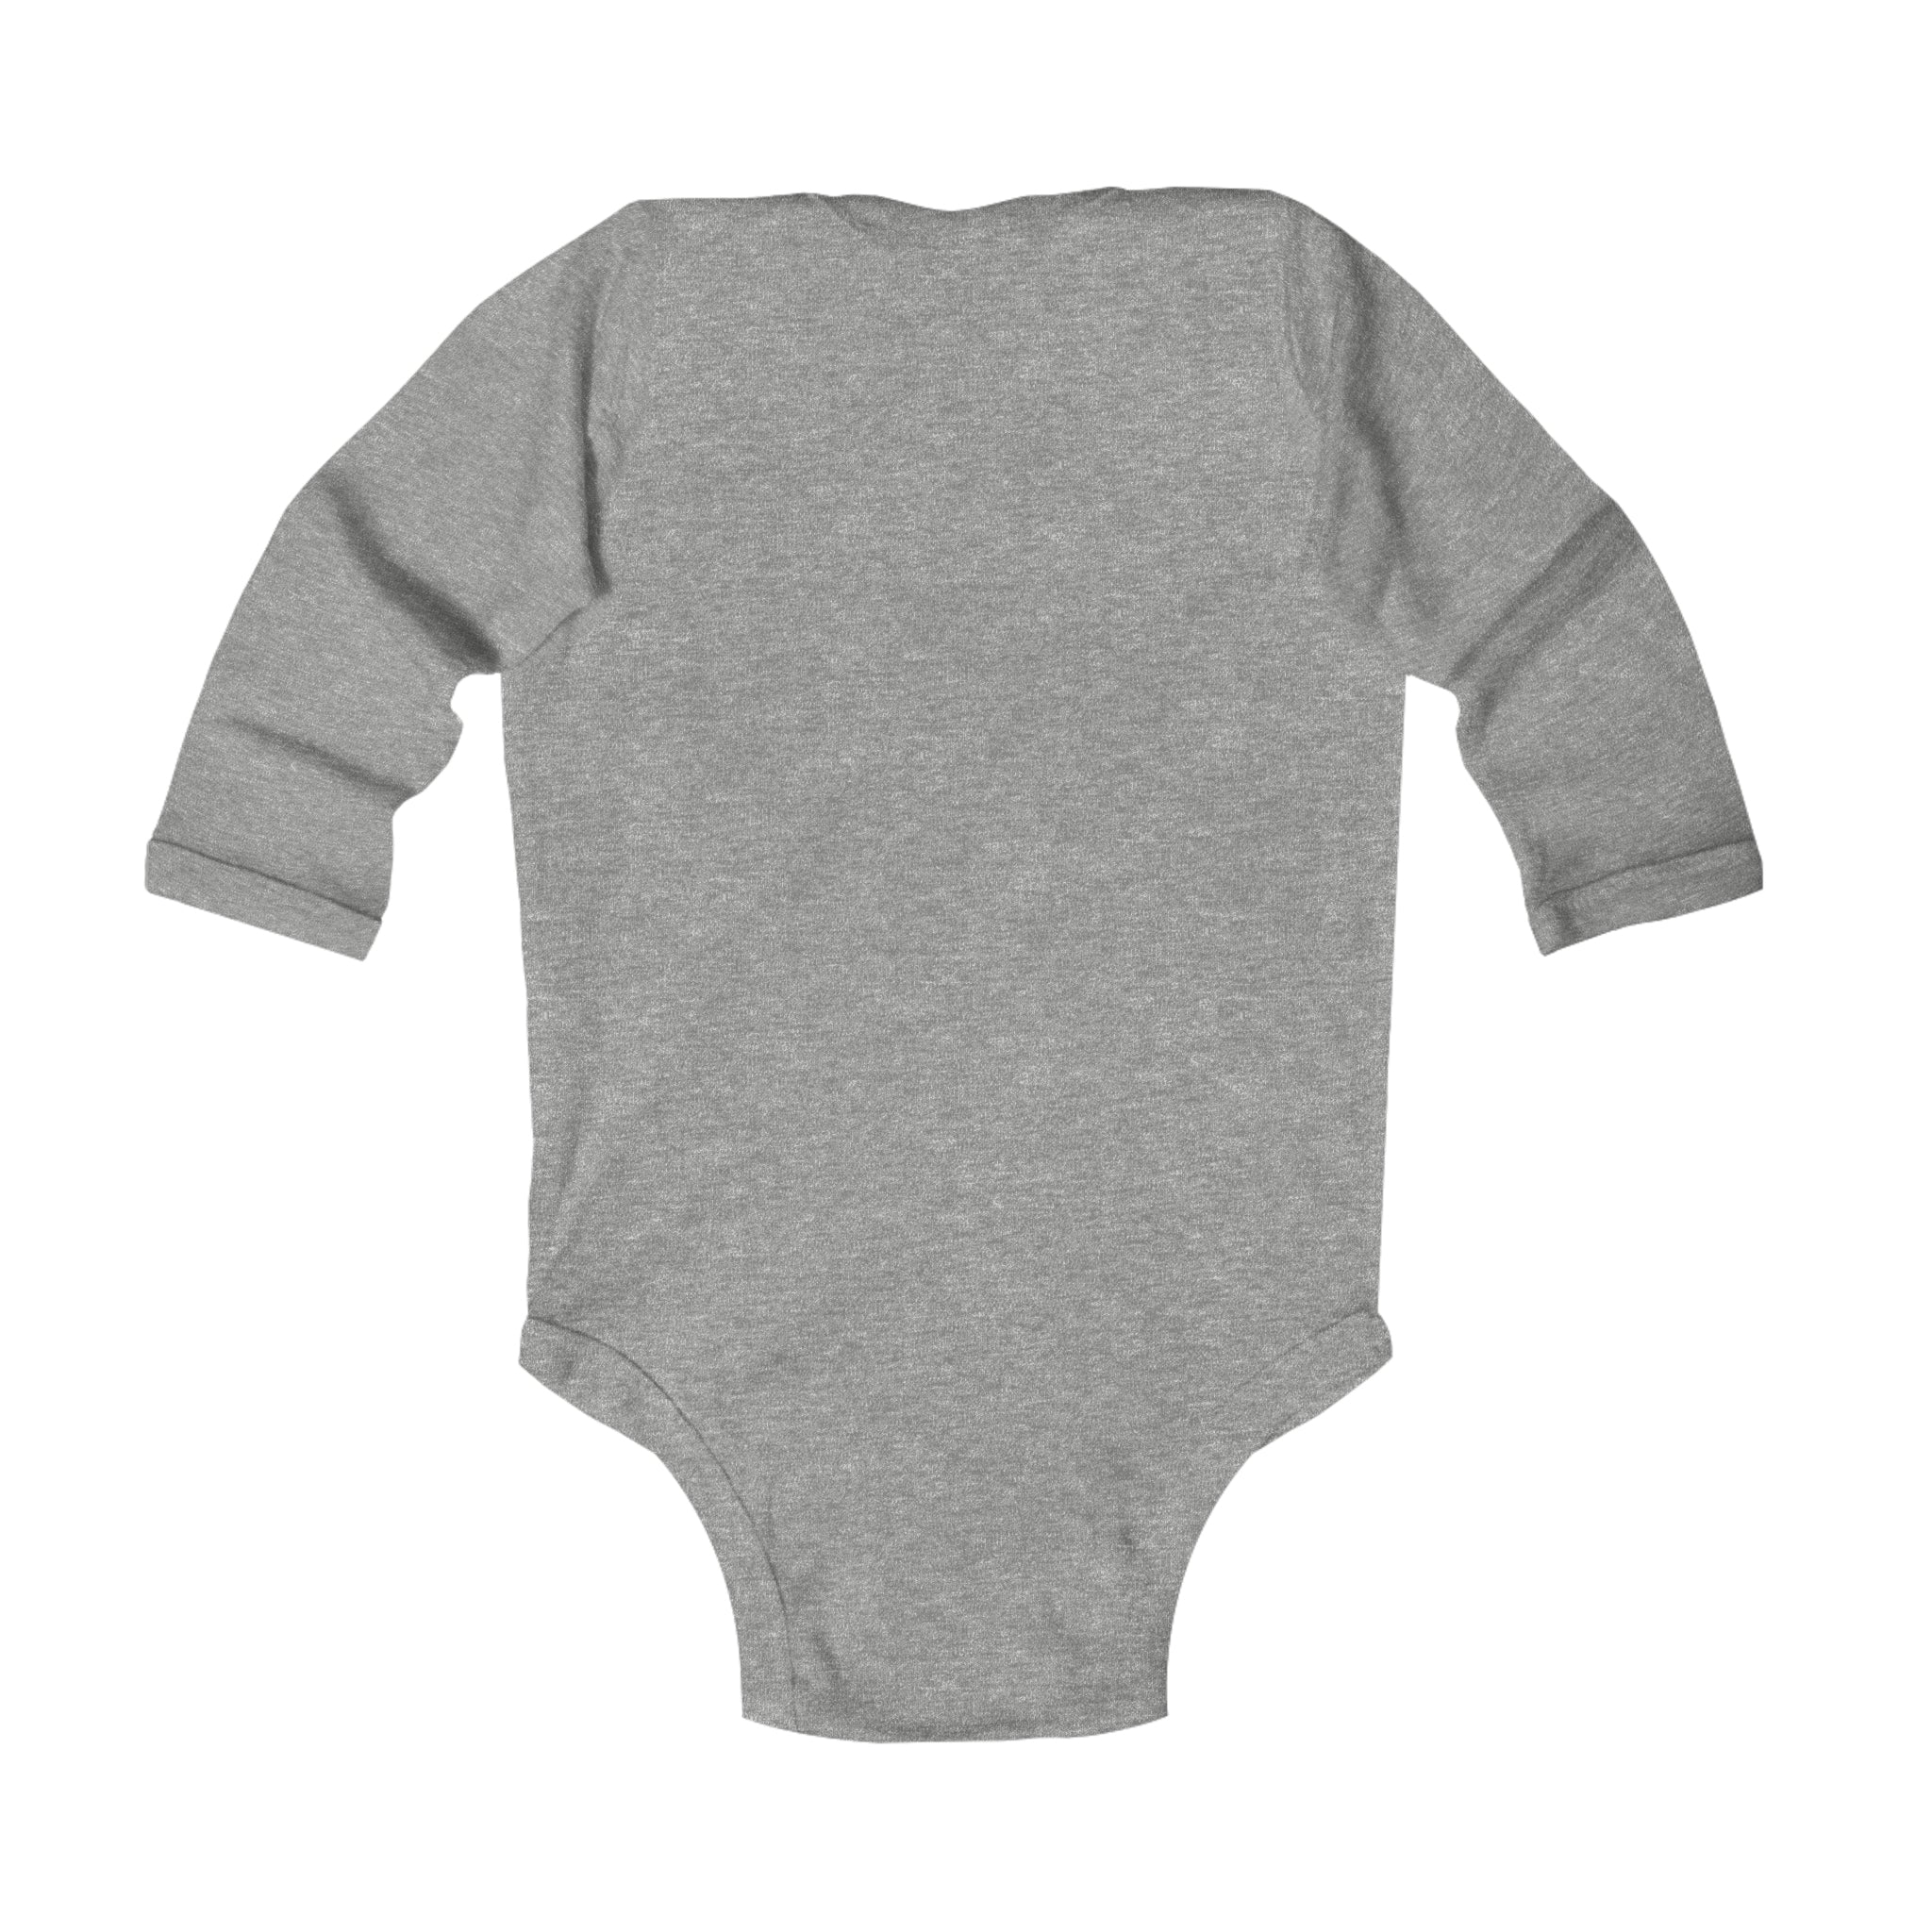 Fearfully and Wonderfully made infant onesie long sleeve